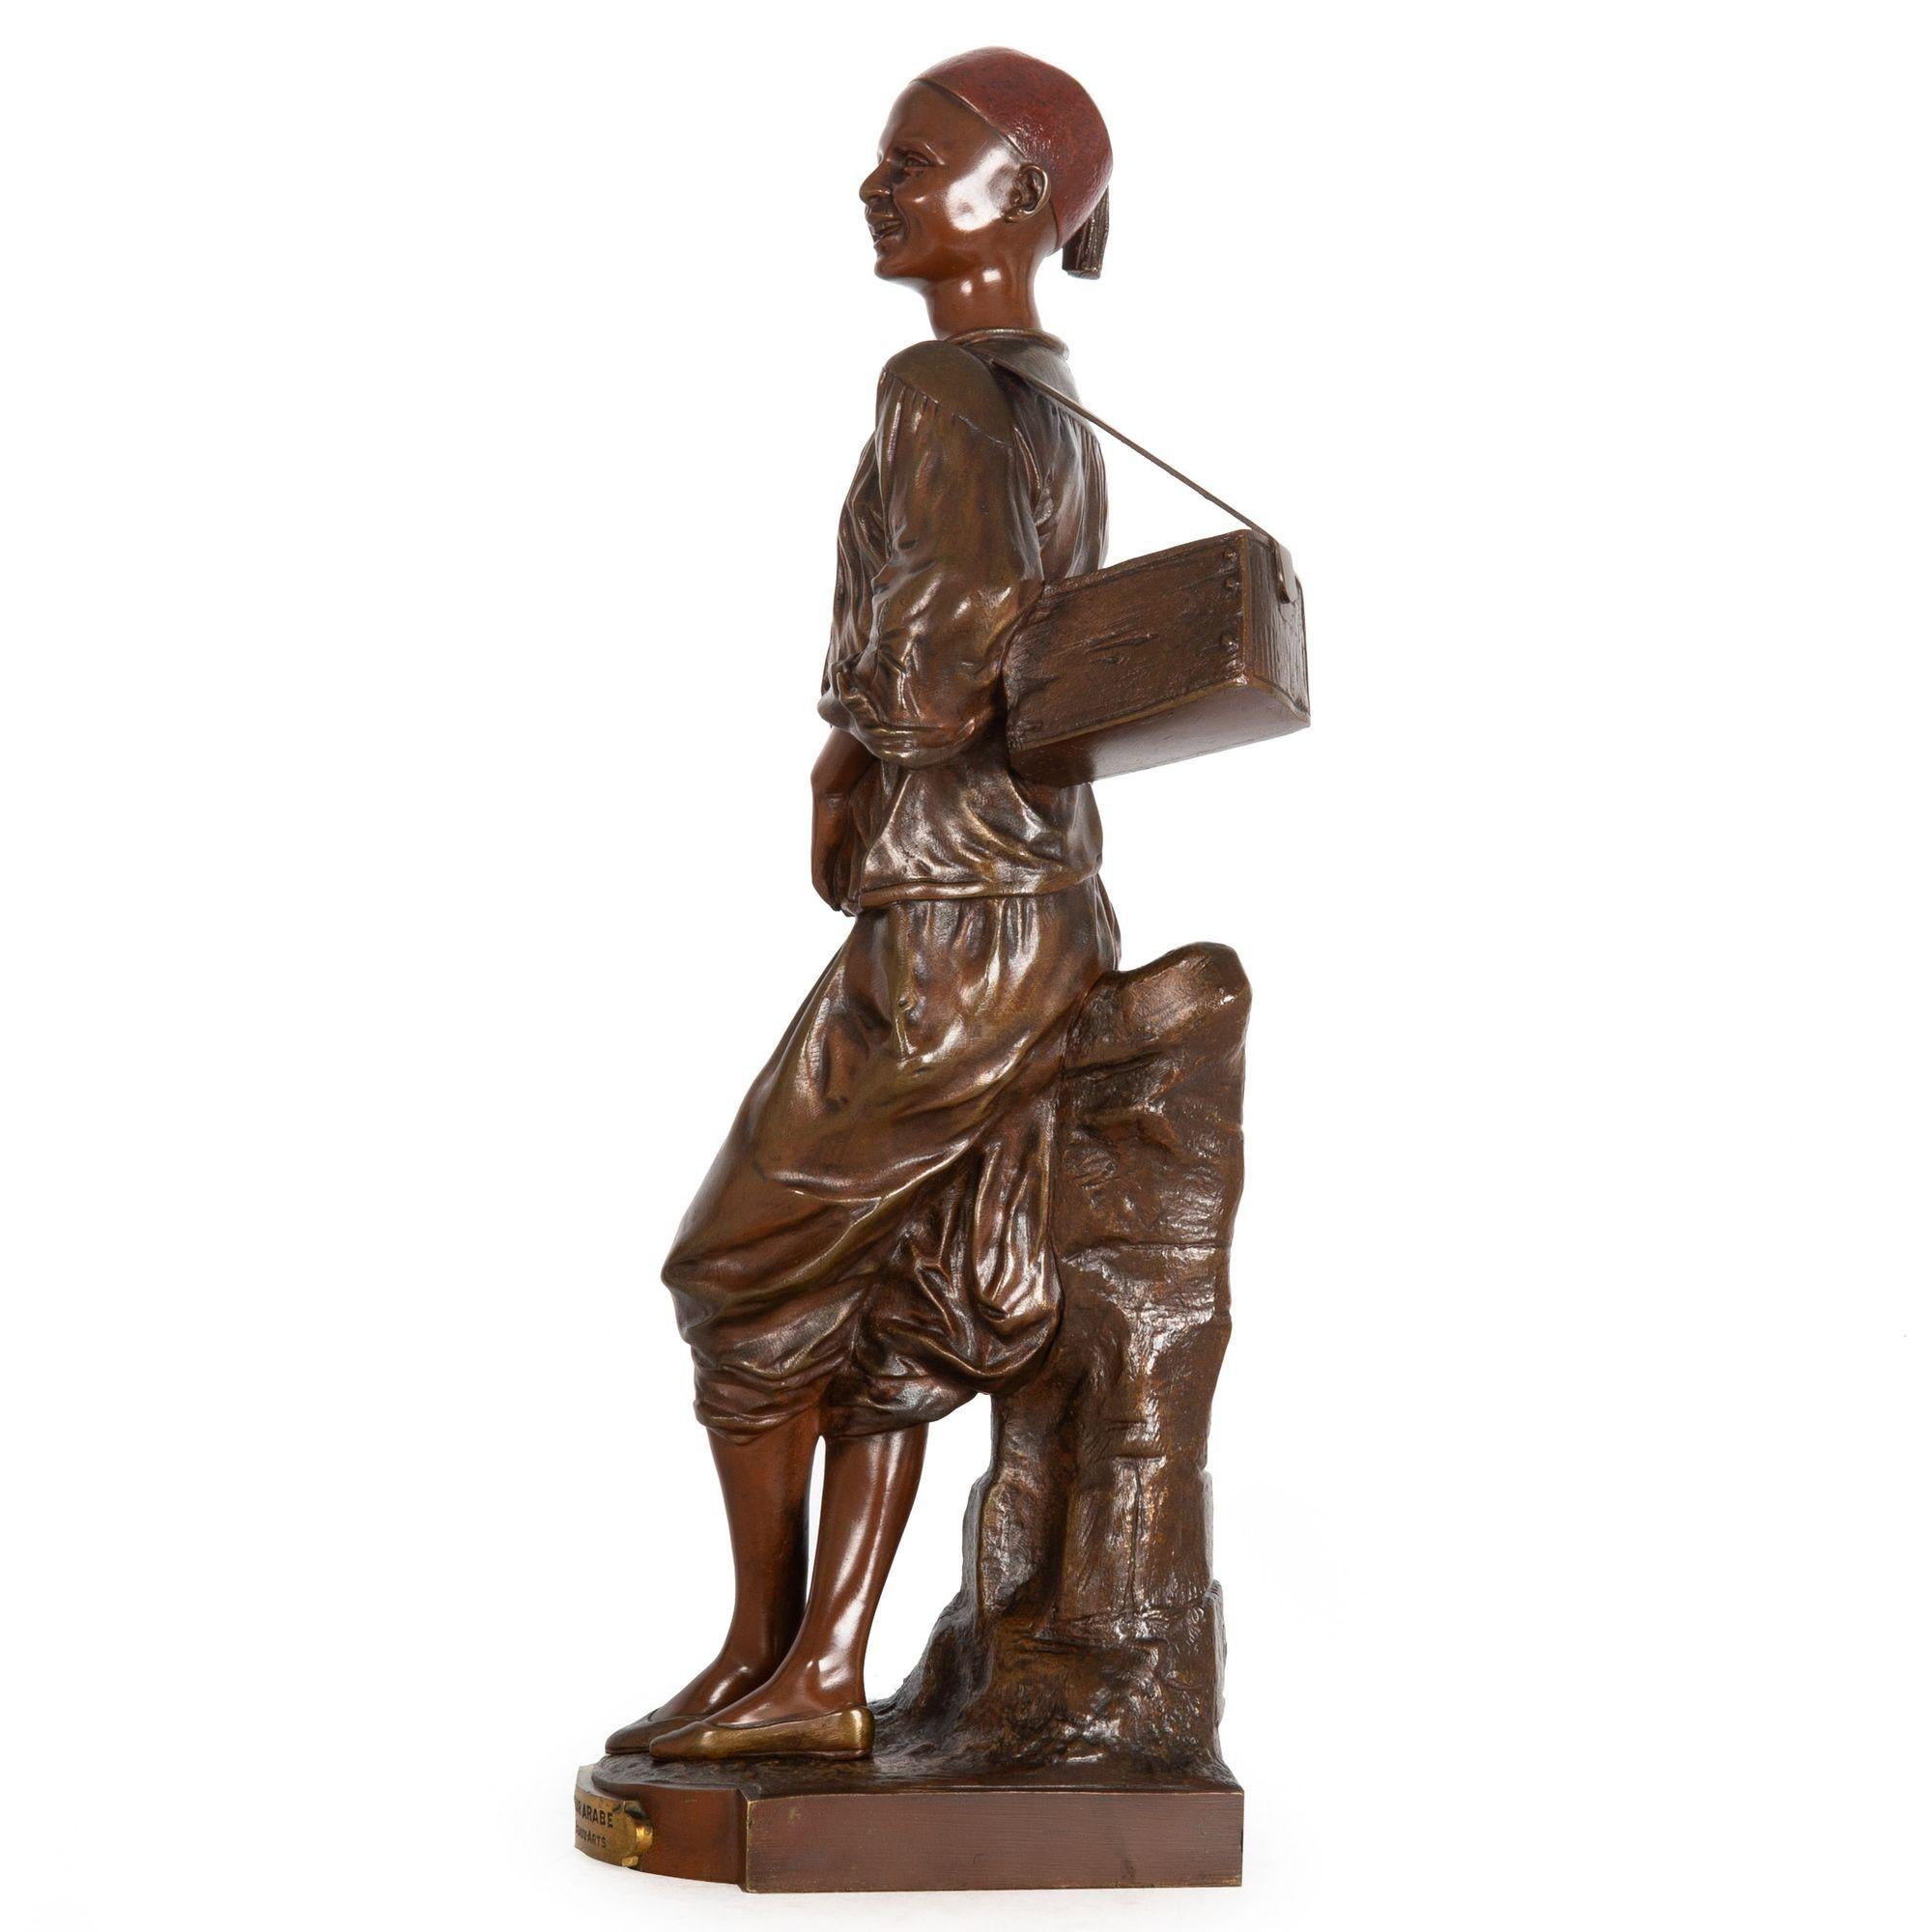 French Orientalist Antique Bronze Sculpture by Edouard Drouot of Shoeshine Boy In Good Condition For Sale In Shippensburg, PA